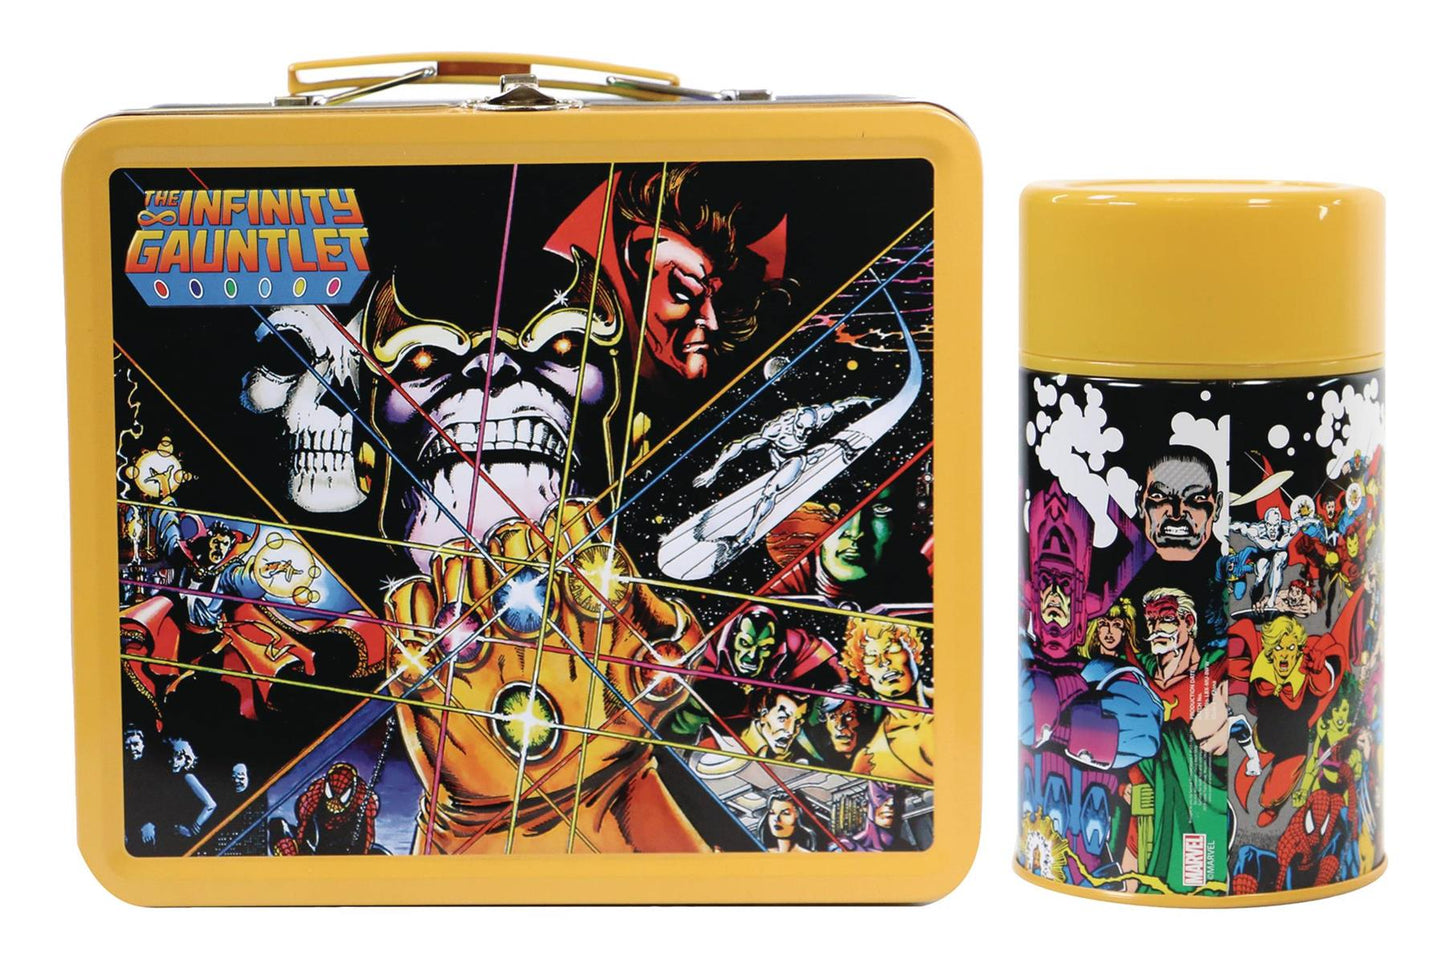 Tin Titans The Infinity Gauntlet Px Lunch Box W/bev Con (c: